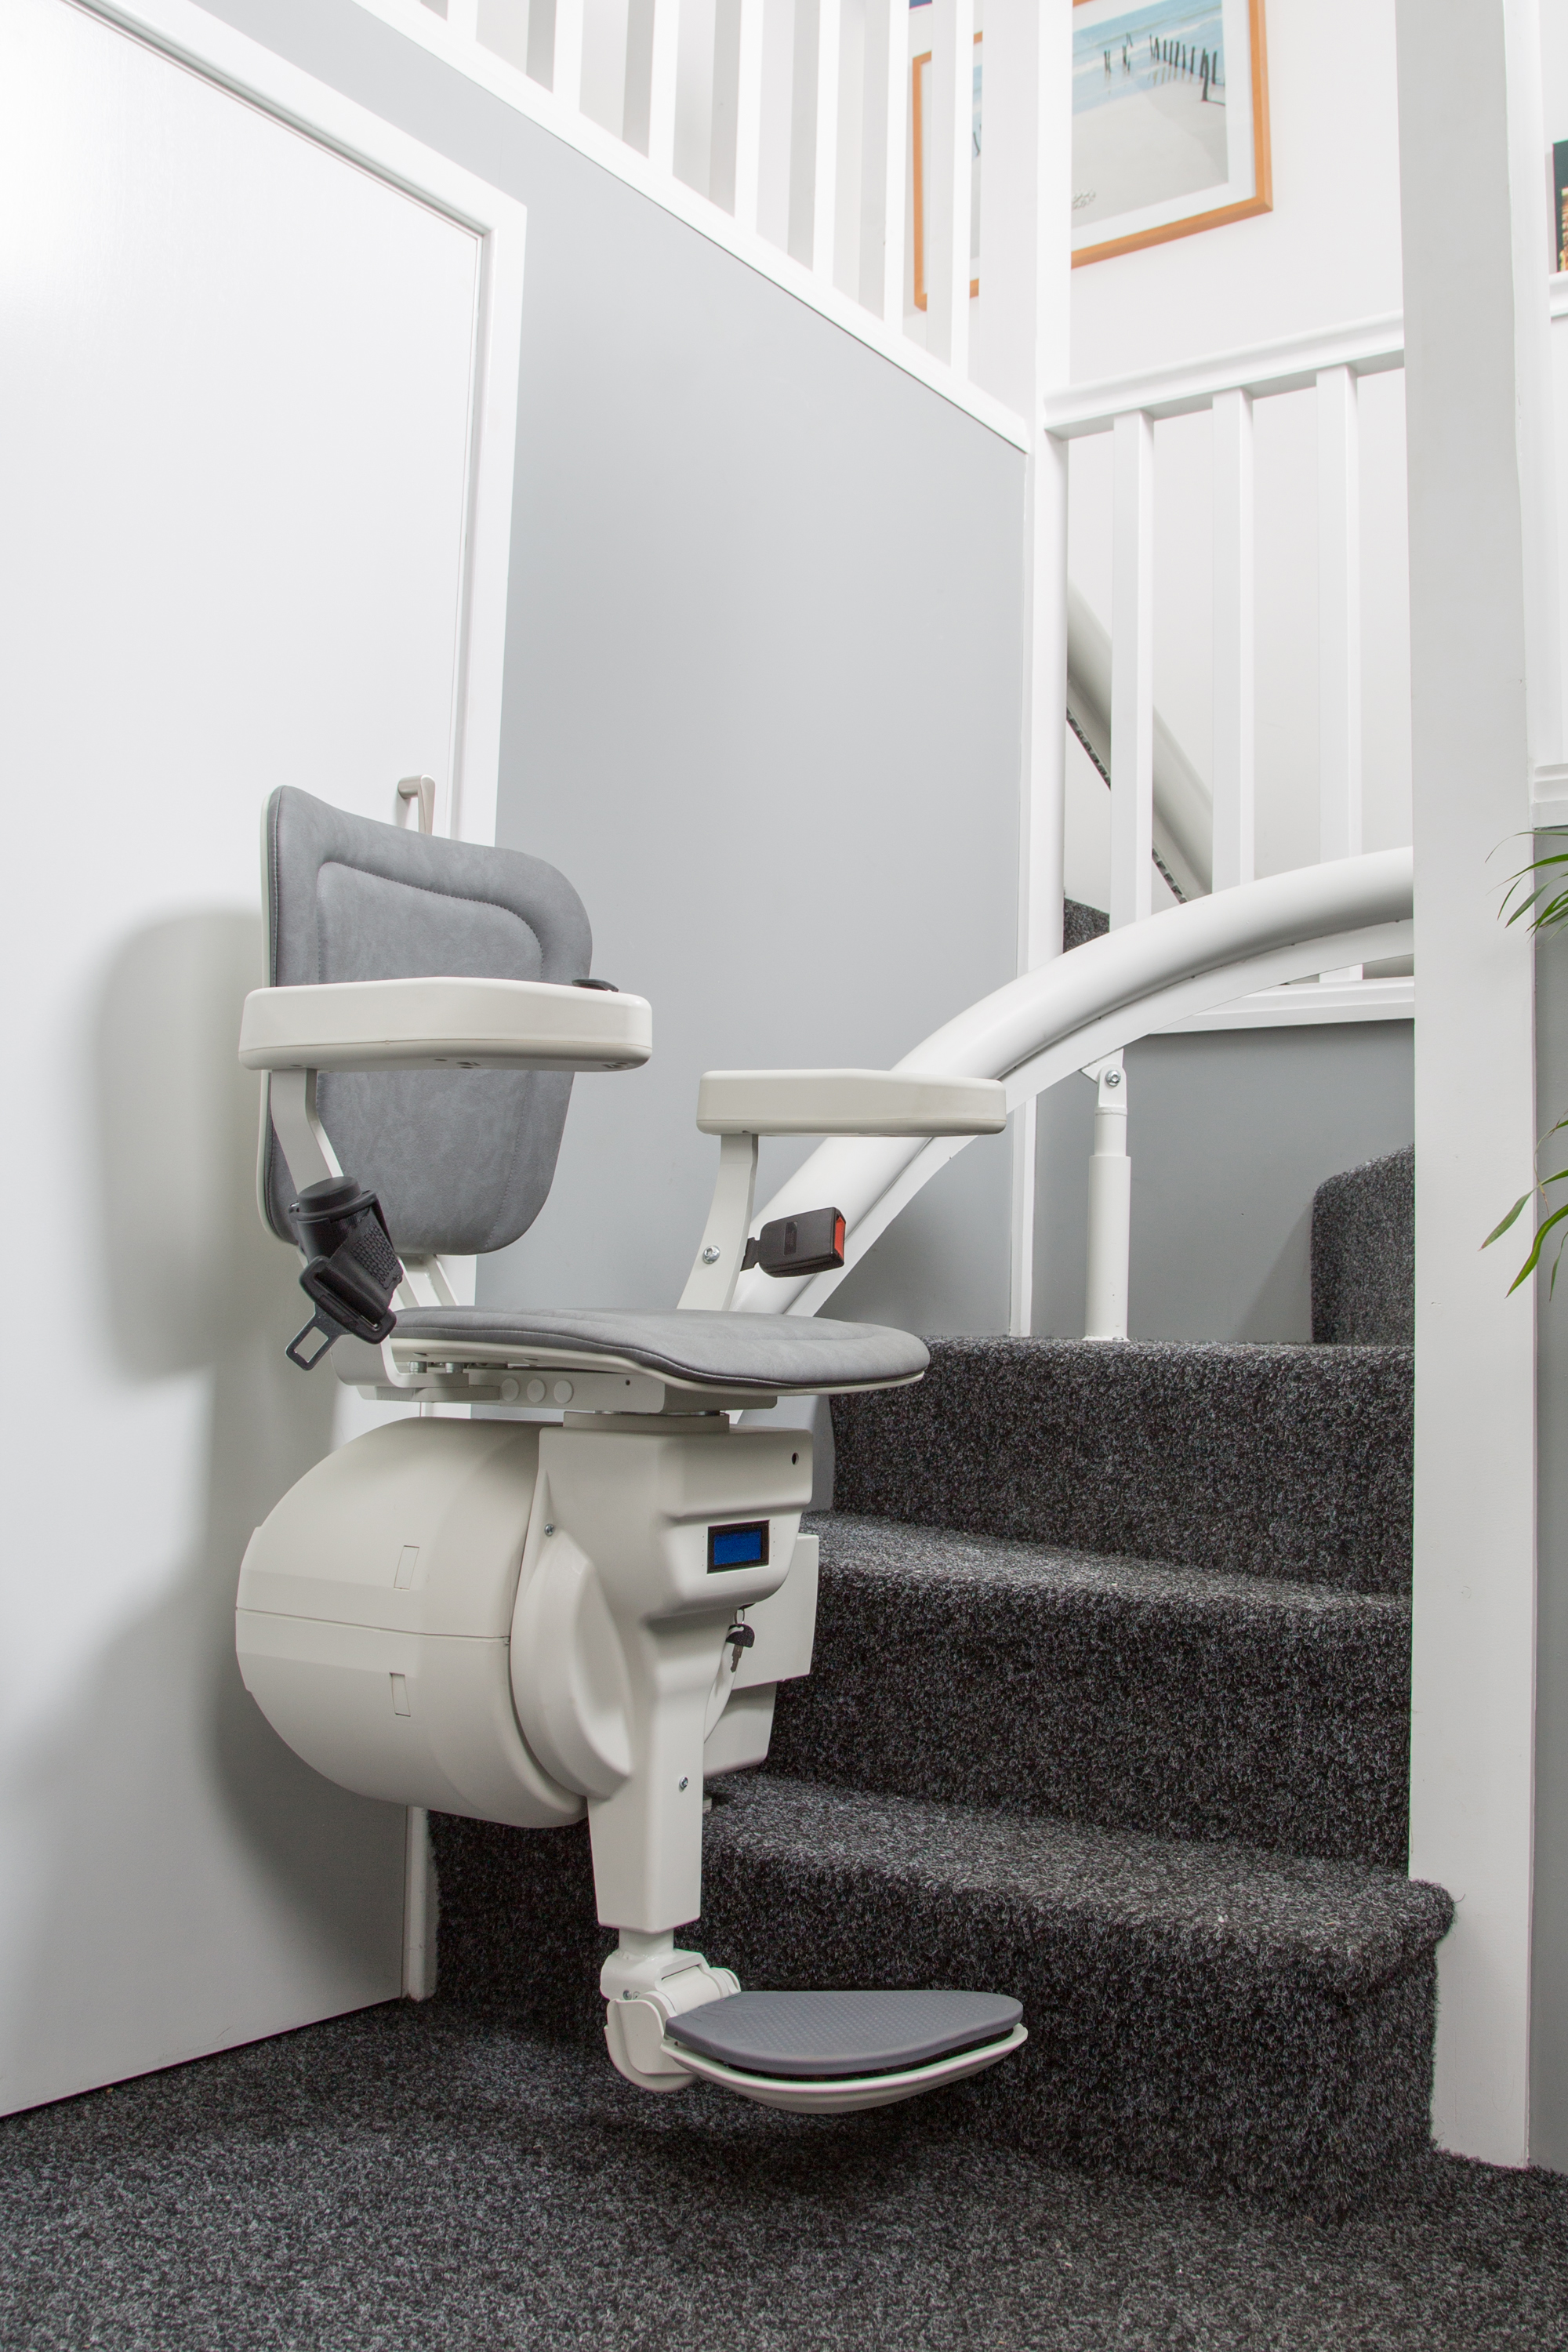 First Step Stairlift – The Platinum Ultimate